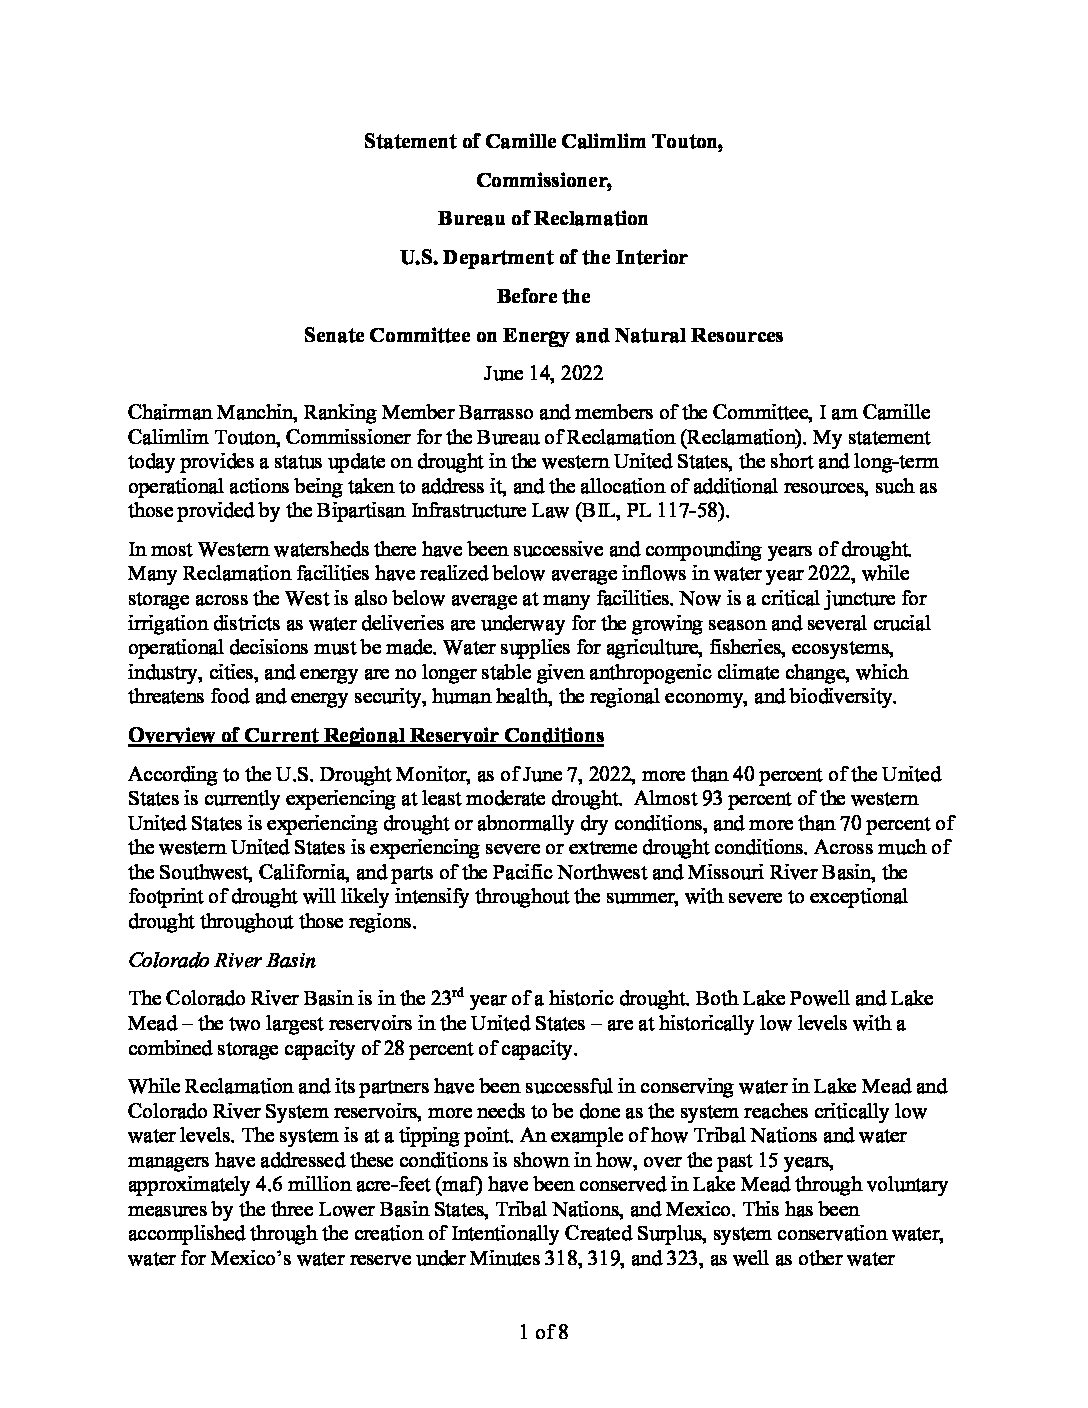 Statement of Camille Calimlim Touton, Commissioner, Bureau of Reclamation U.S. Department of the Interior Before the Senate Committee on Energy and Natural Resources June 14, 2022